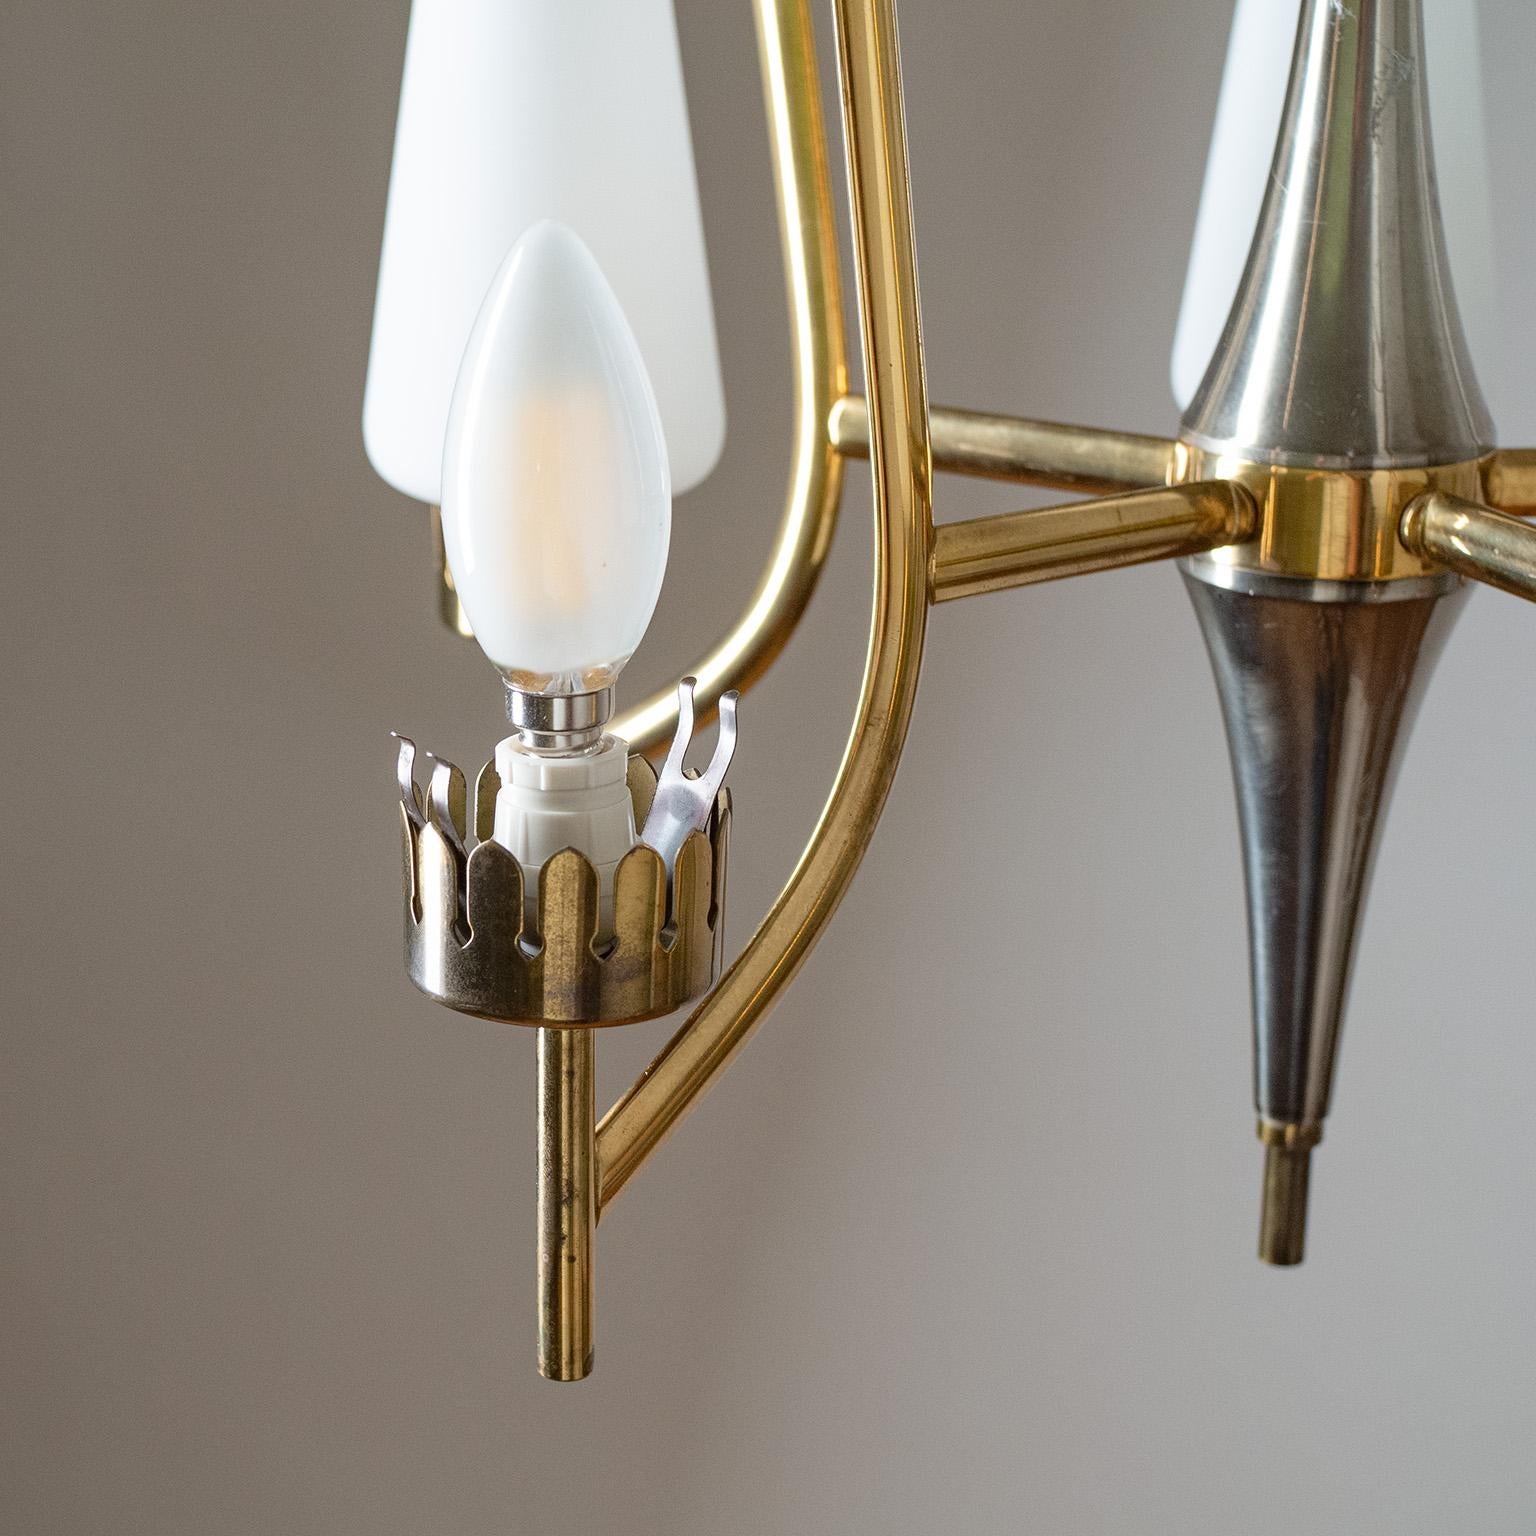 Mid-20th Century Italian Brass and Glass Chandelier, circa 1960 For Sale